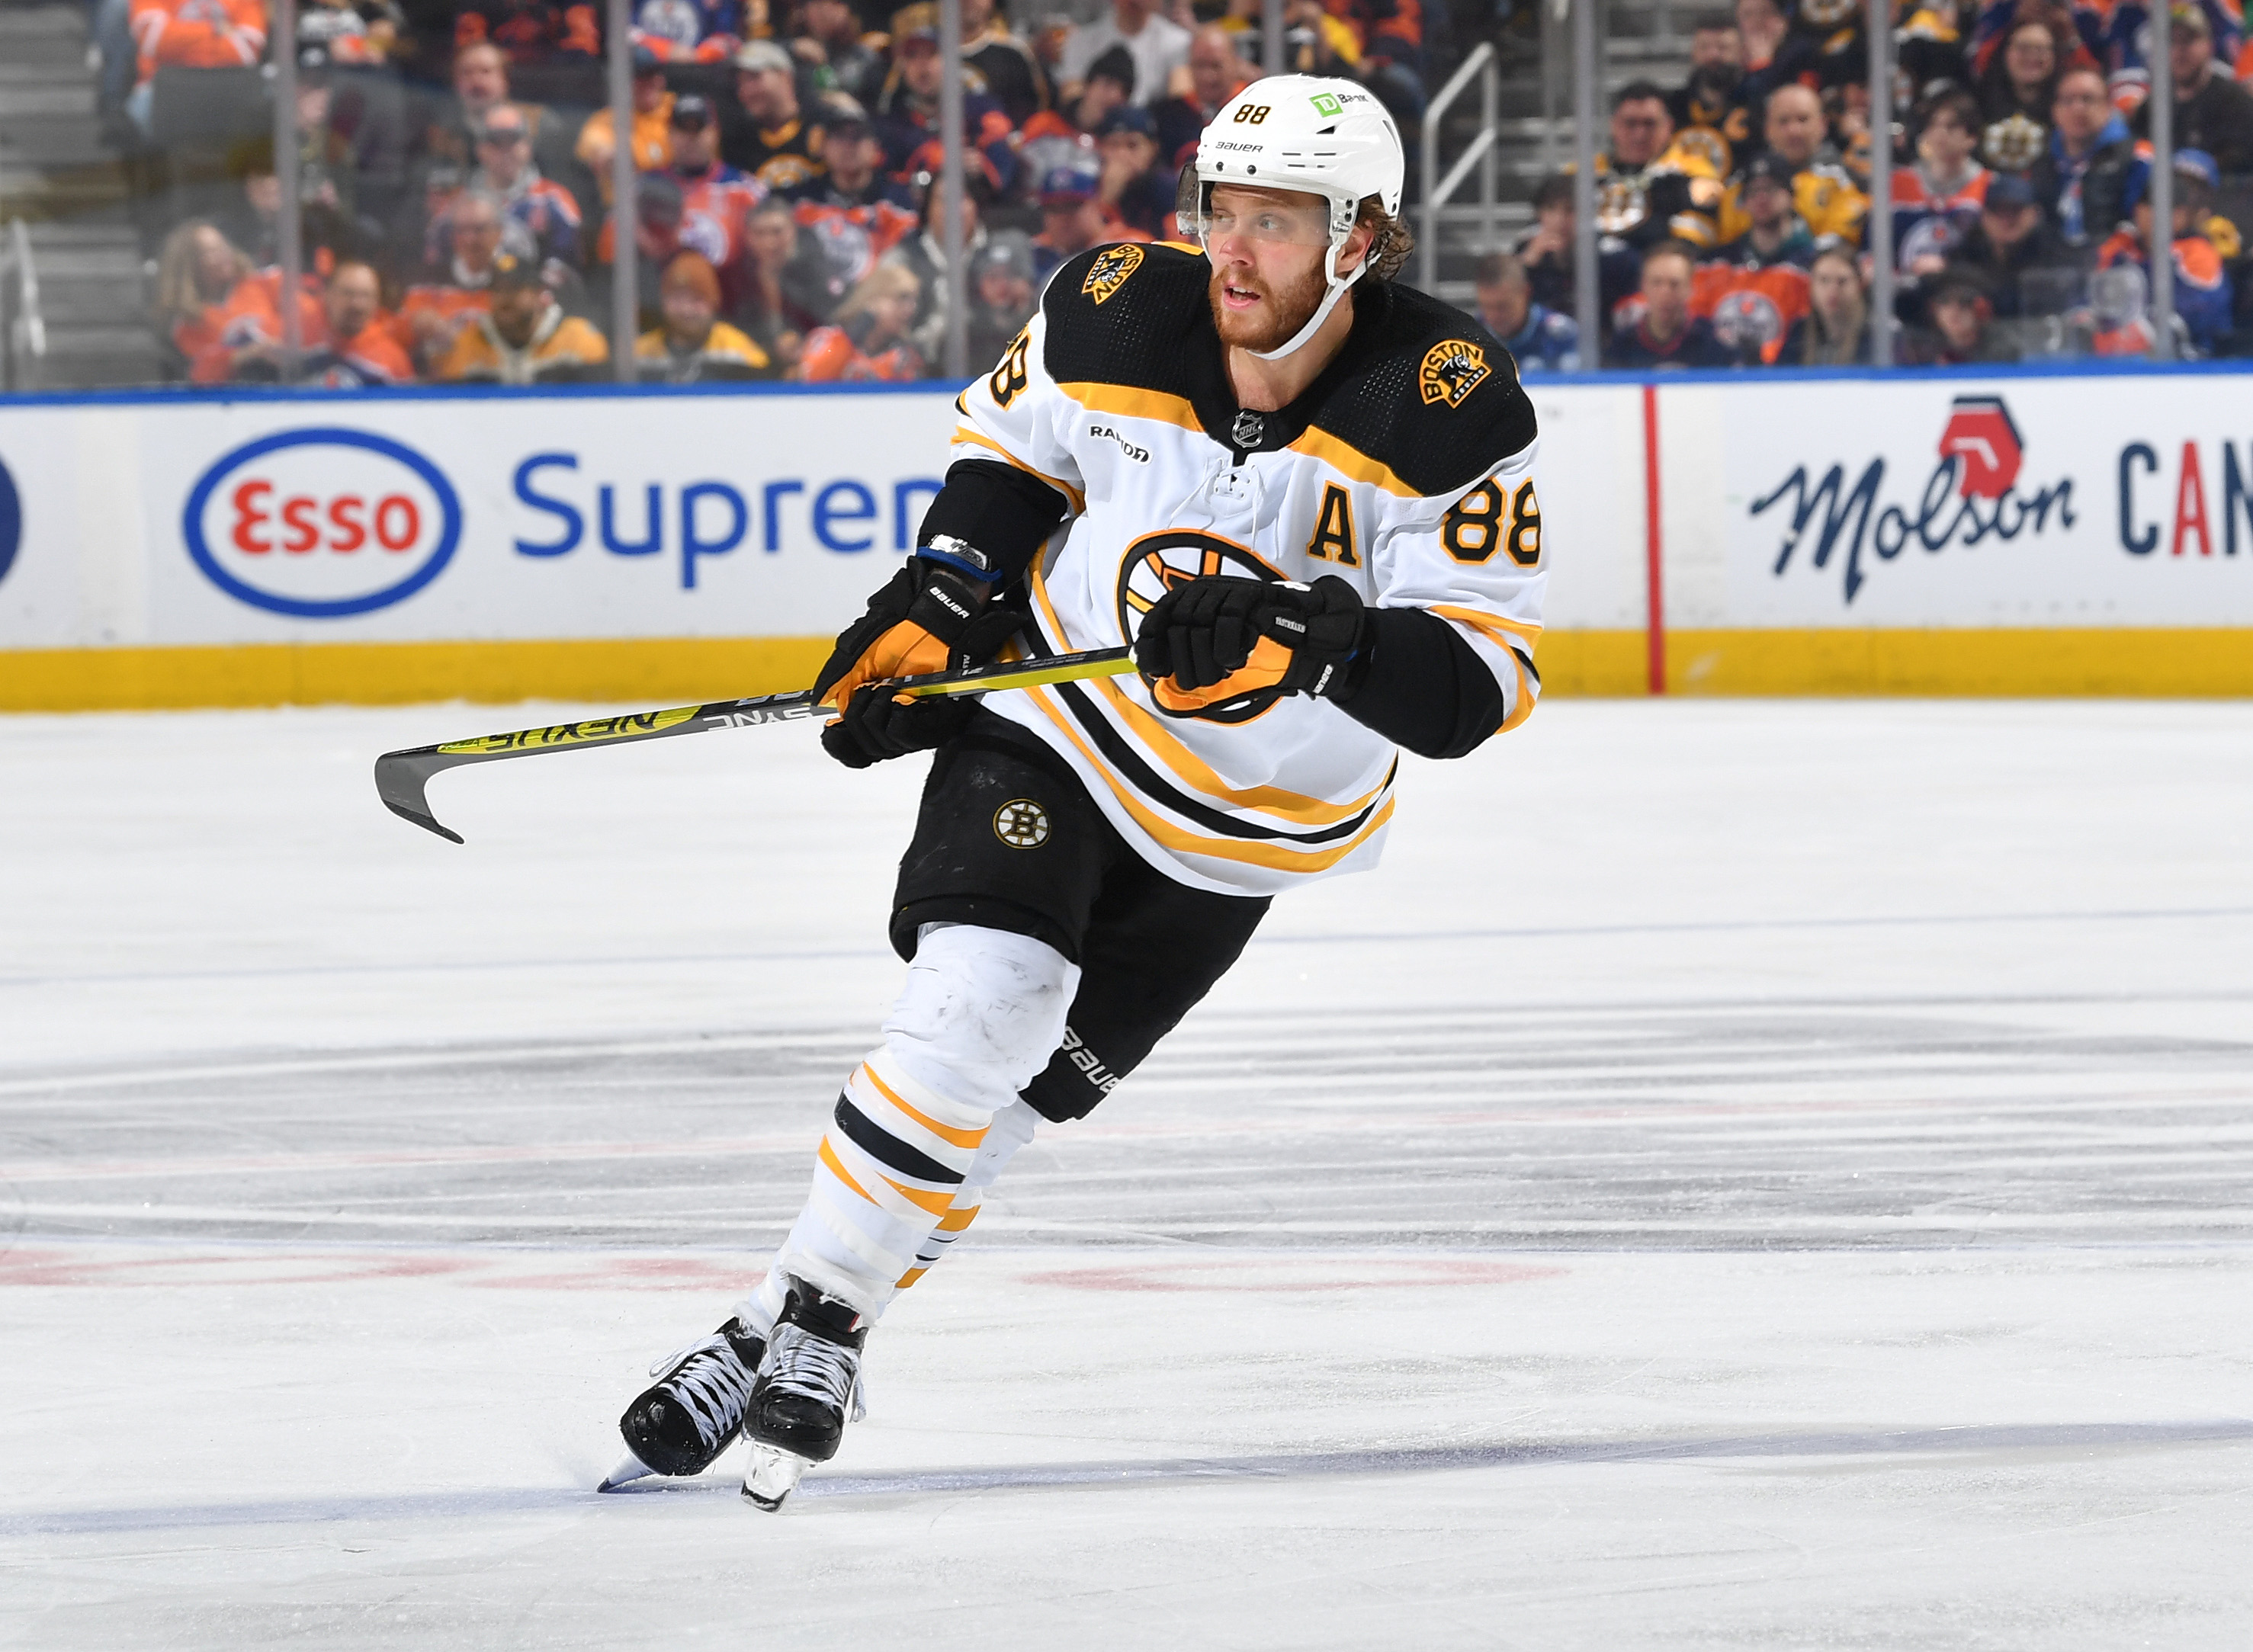 David Pastrnak #88 of the Boston Bruins skates during the game against the Edmonton Oilers on February 27, 2023 at Rogers Place in Edmonton, Alberta, Canada.